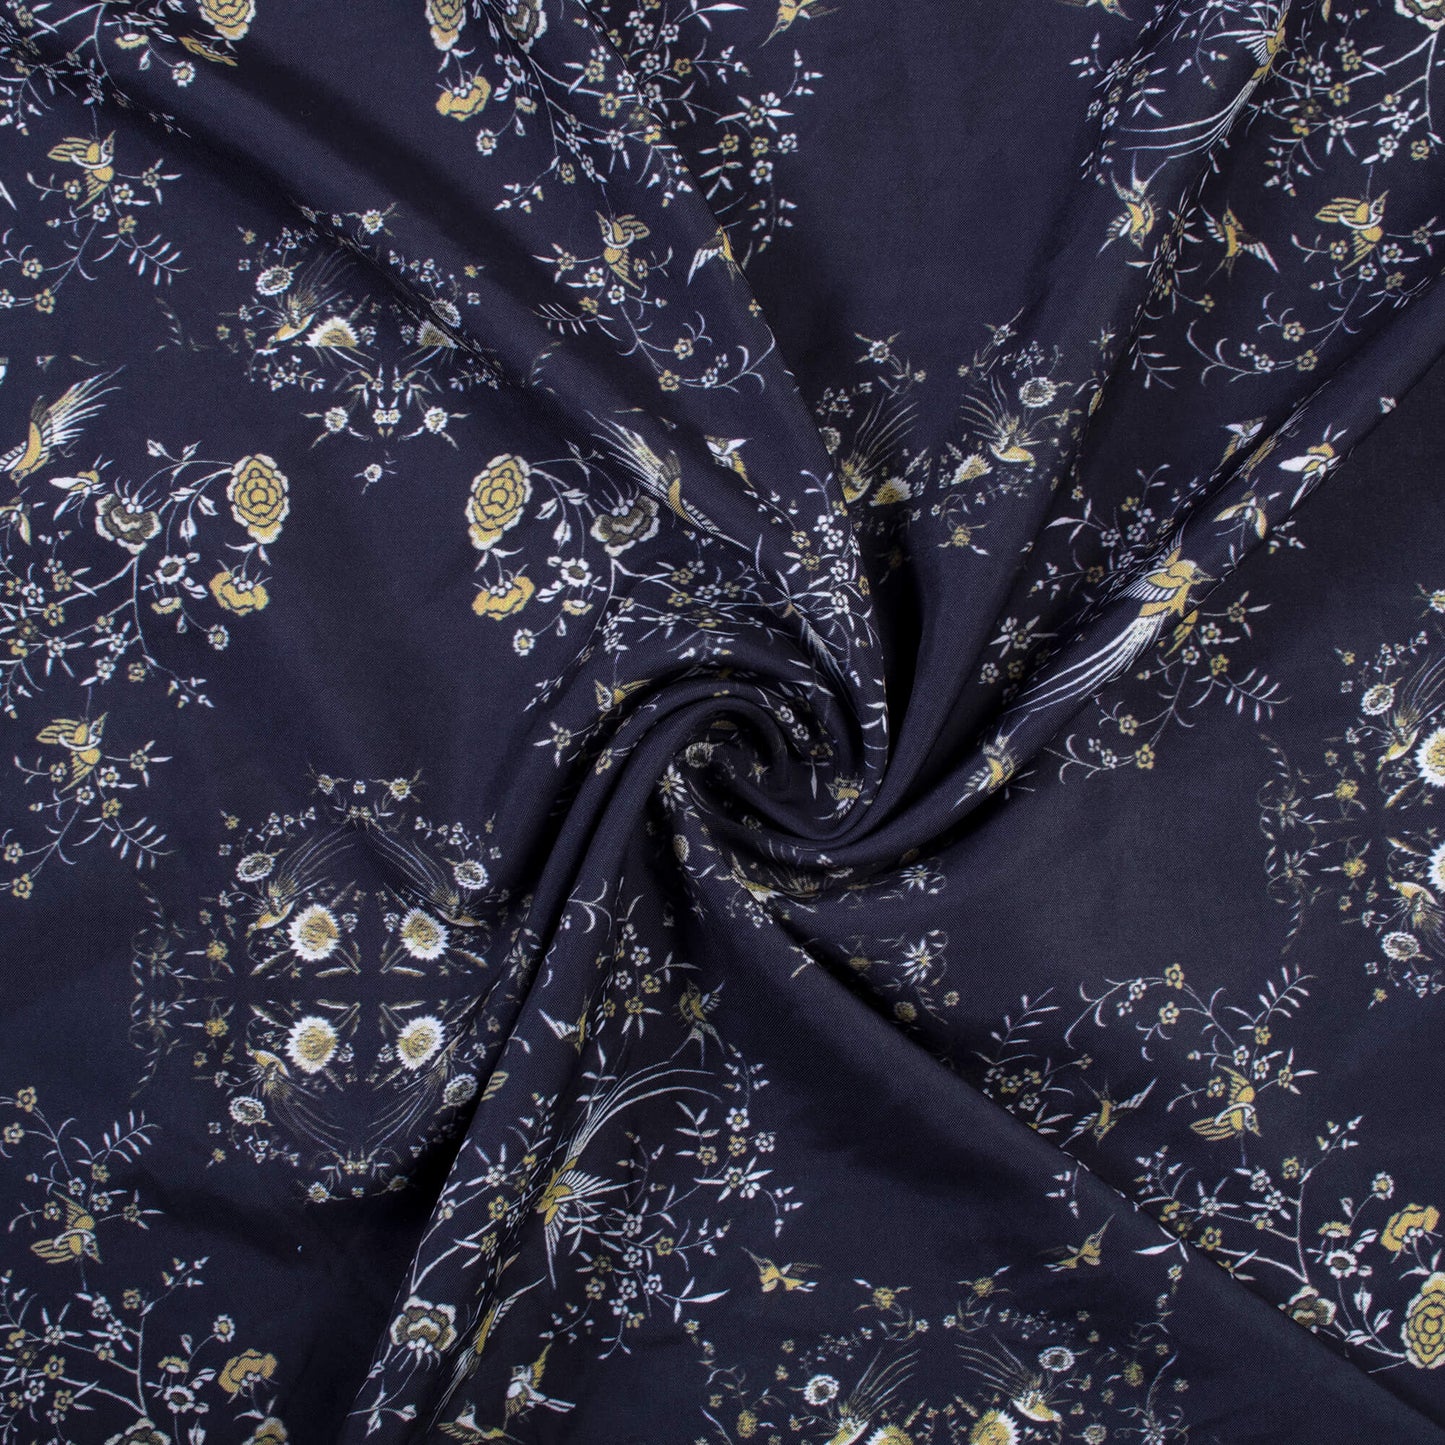 Dark Blue And Beige Floral Pattern Digital Print Crepe Fabric (Width 58 Inches)